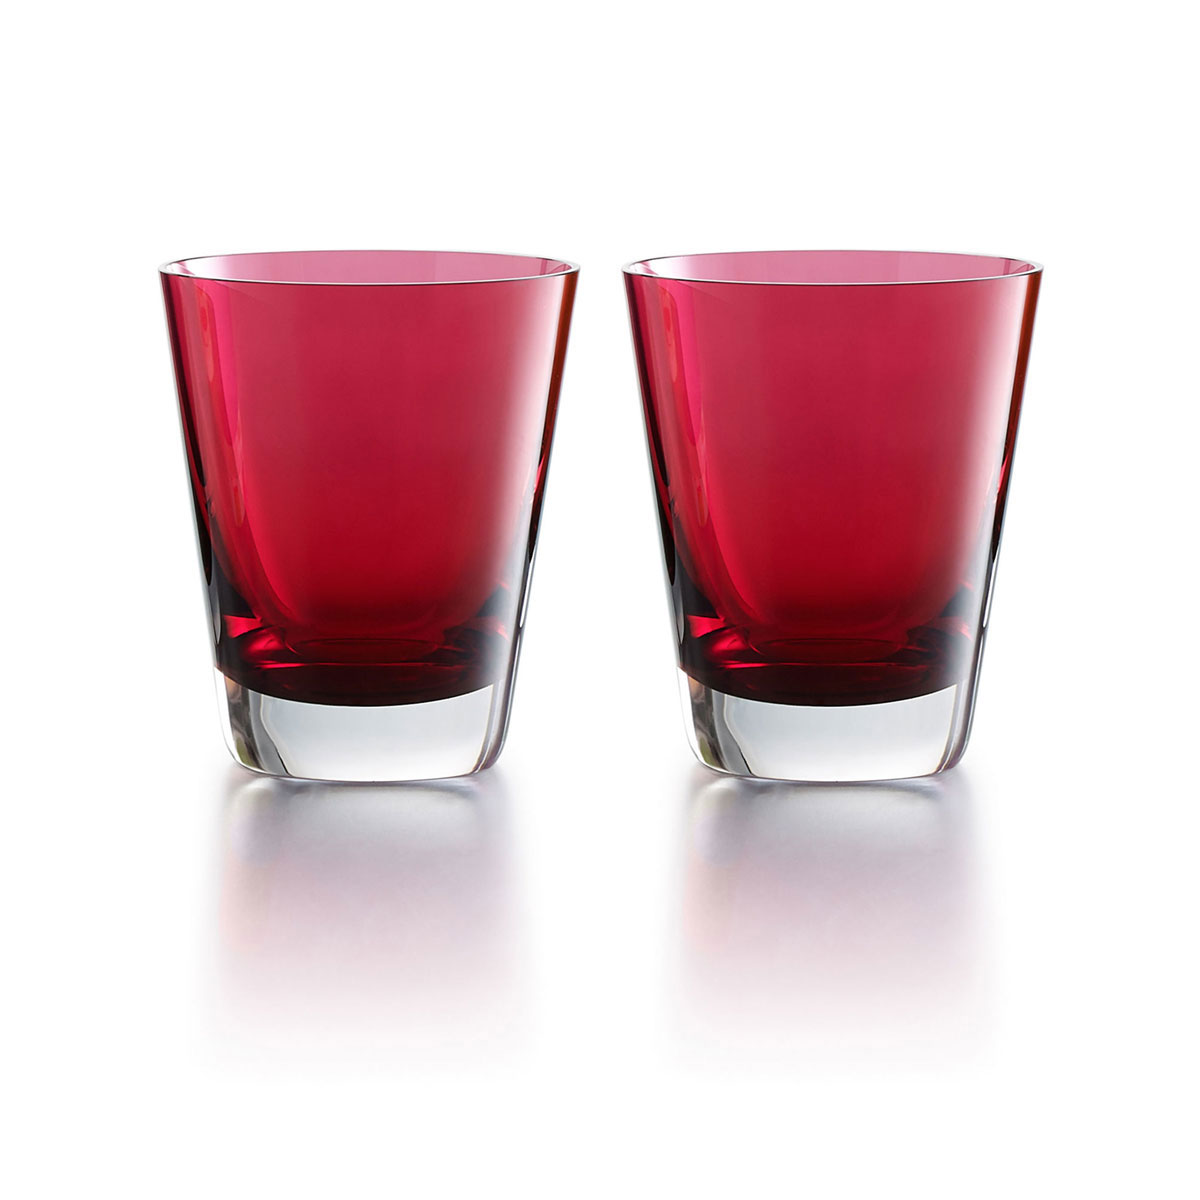 Baccarat Crystal, Mosaique Tumbler Red, Boxed, Pair